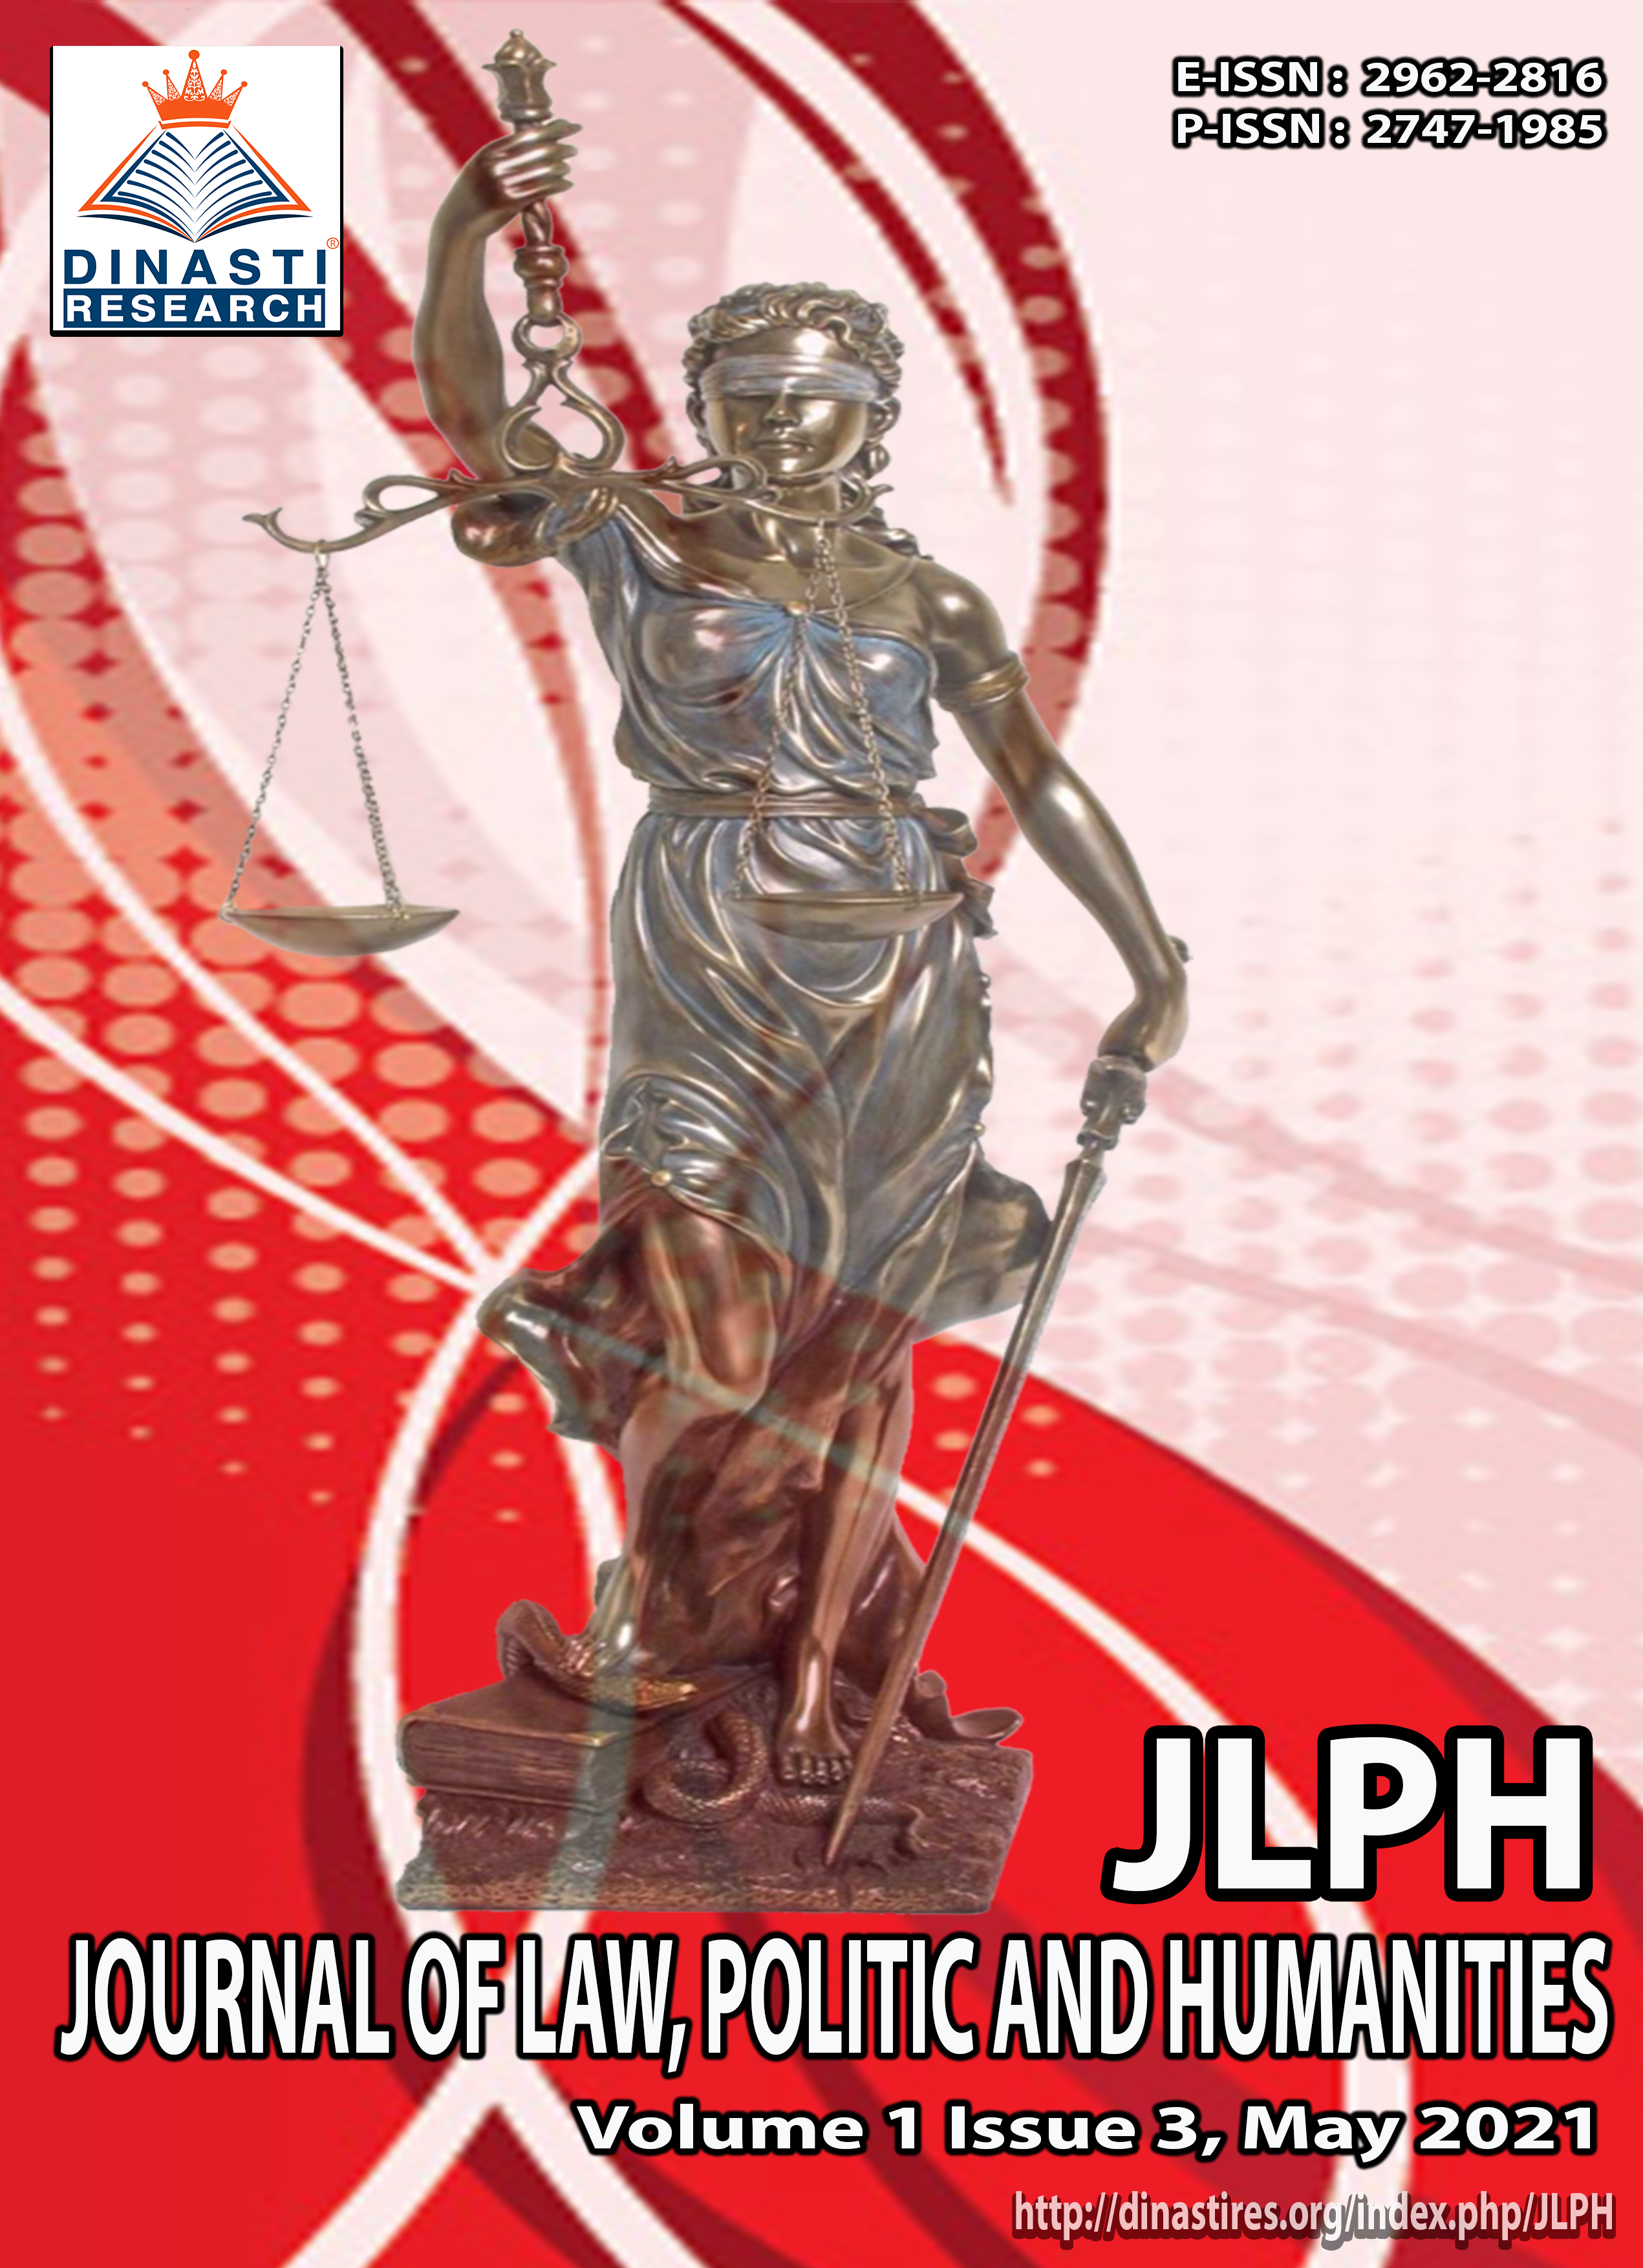 					View Vol. 1 No. 3 (2021): (JLPH) Journal of Law, Politic and Humanities (May 2021)
				